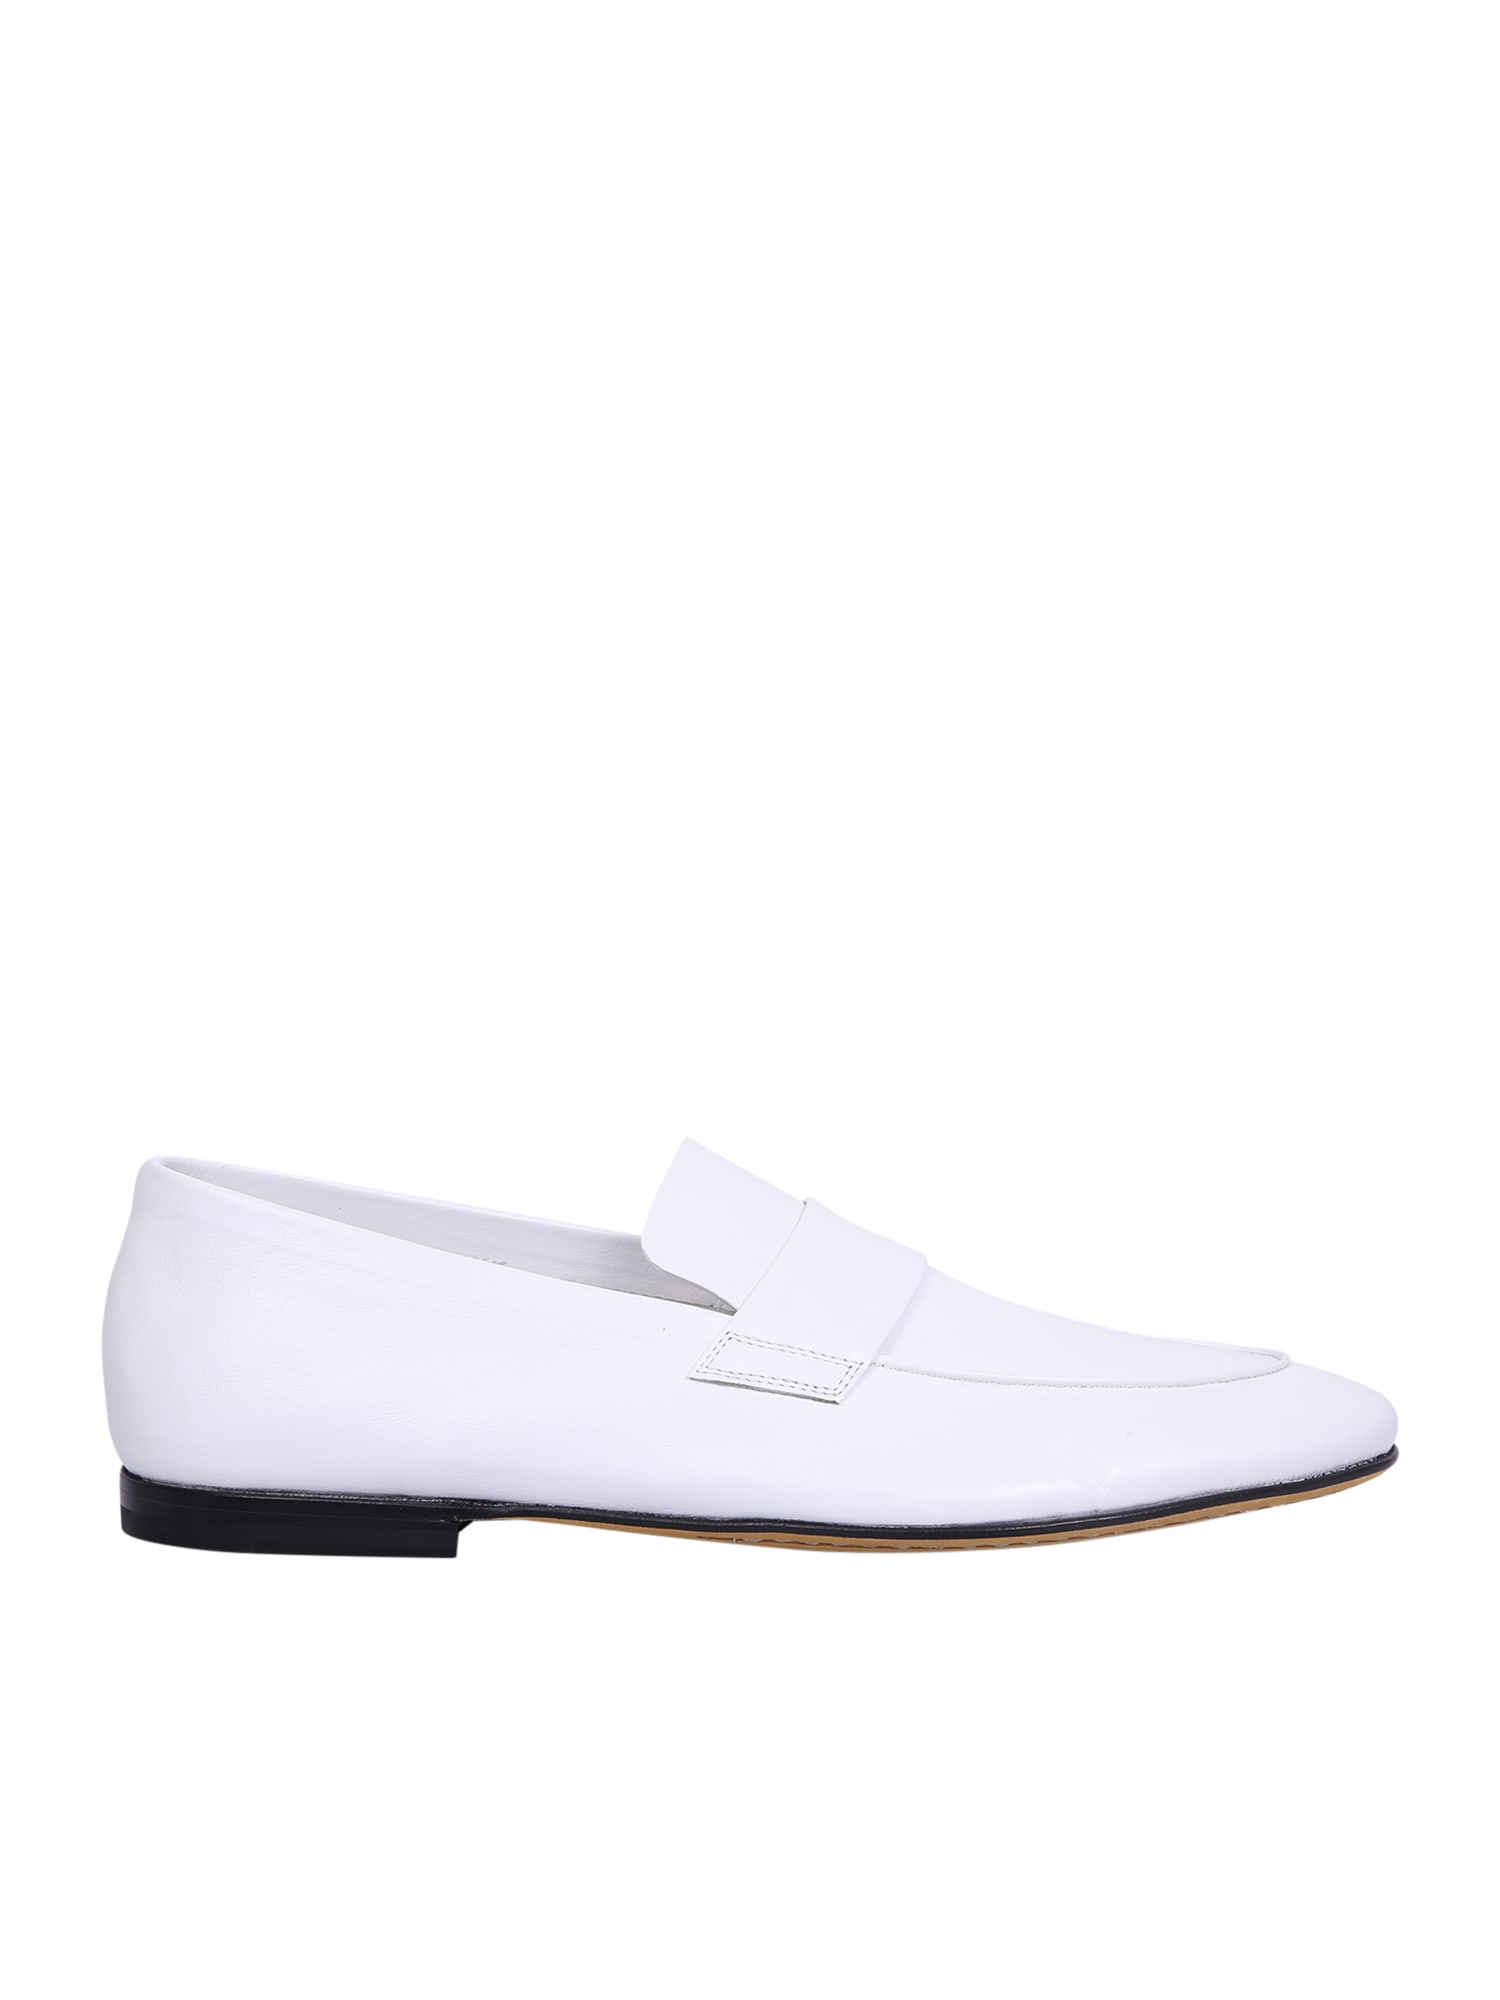 Airto 1 Leather White Loafers